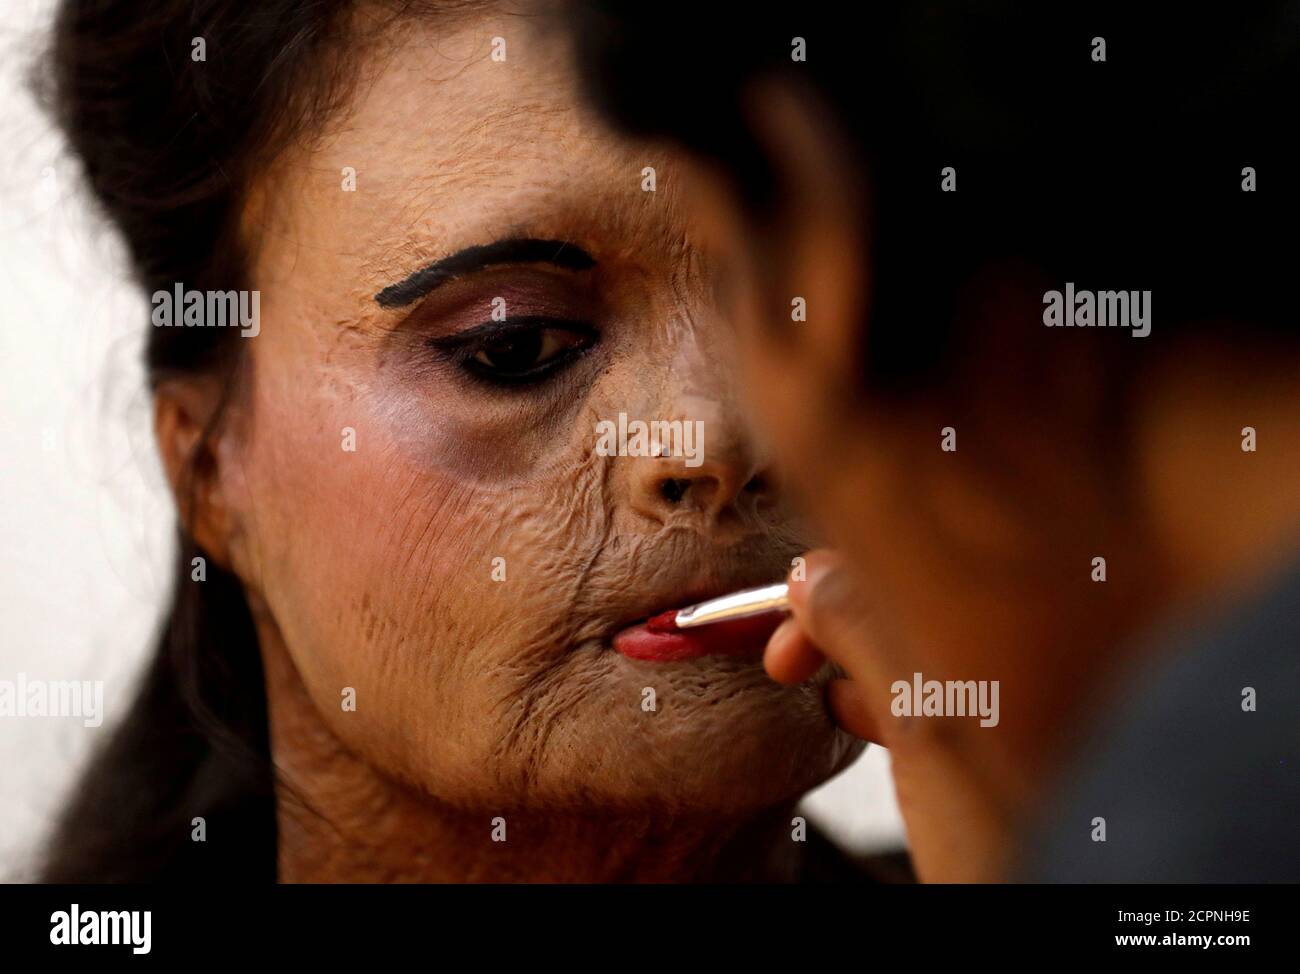 An acid attack survivor has her makeup done backstage prior to a fashion  show to mark International Women's Day in Thane on the outskirts of Mumbai,  India, March 7, 2018. REUTERS/Danish Siddiqui